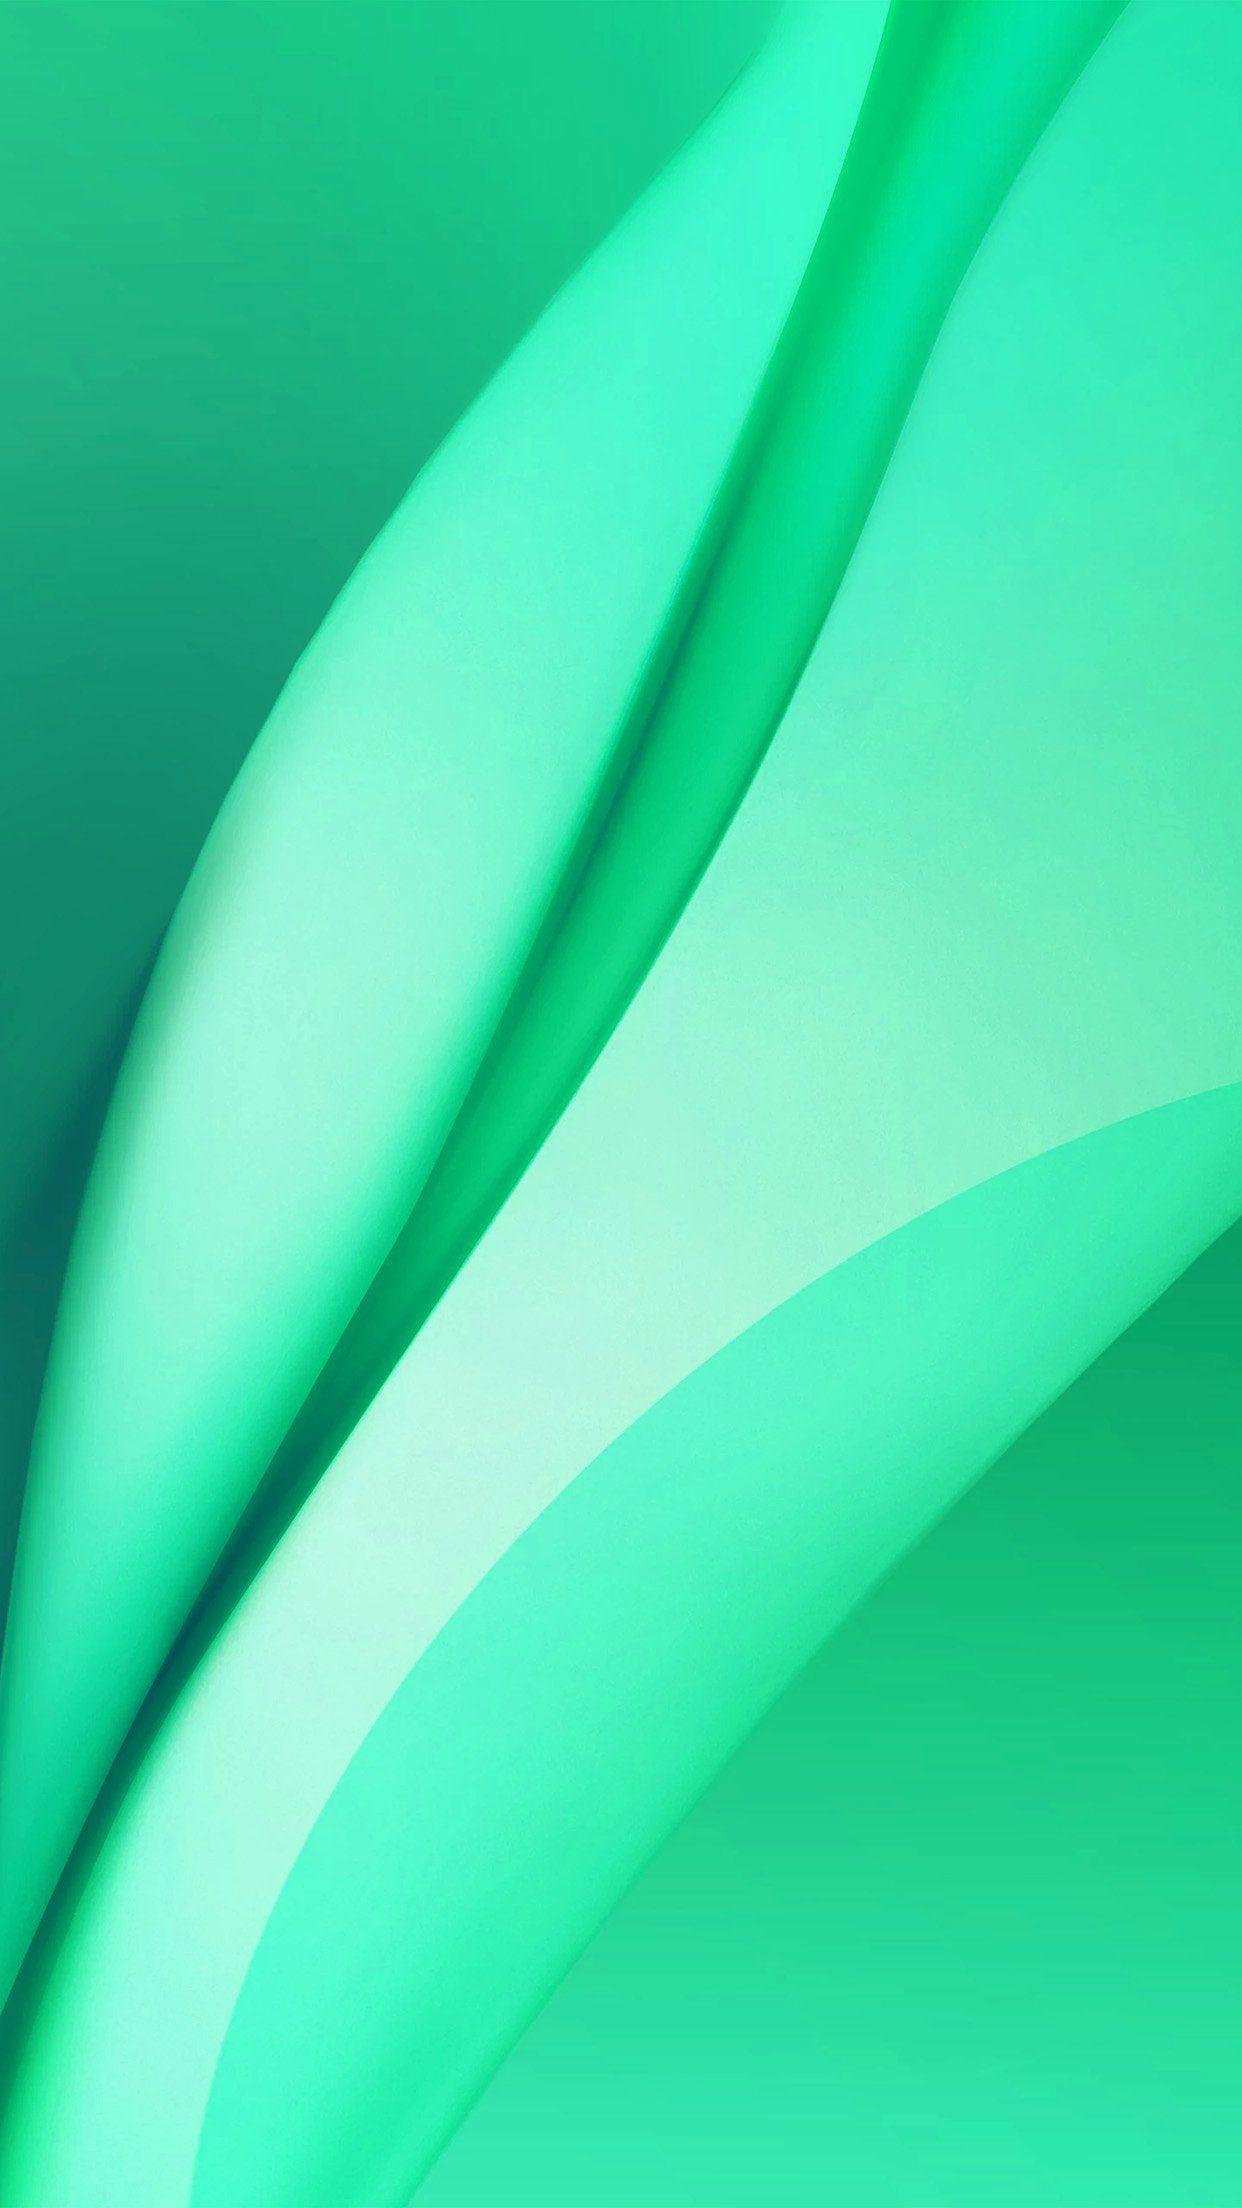 Abstract Green iPhone Wallpapers - Top Free Abstract Green iPhone